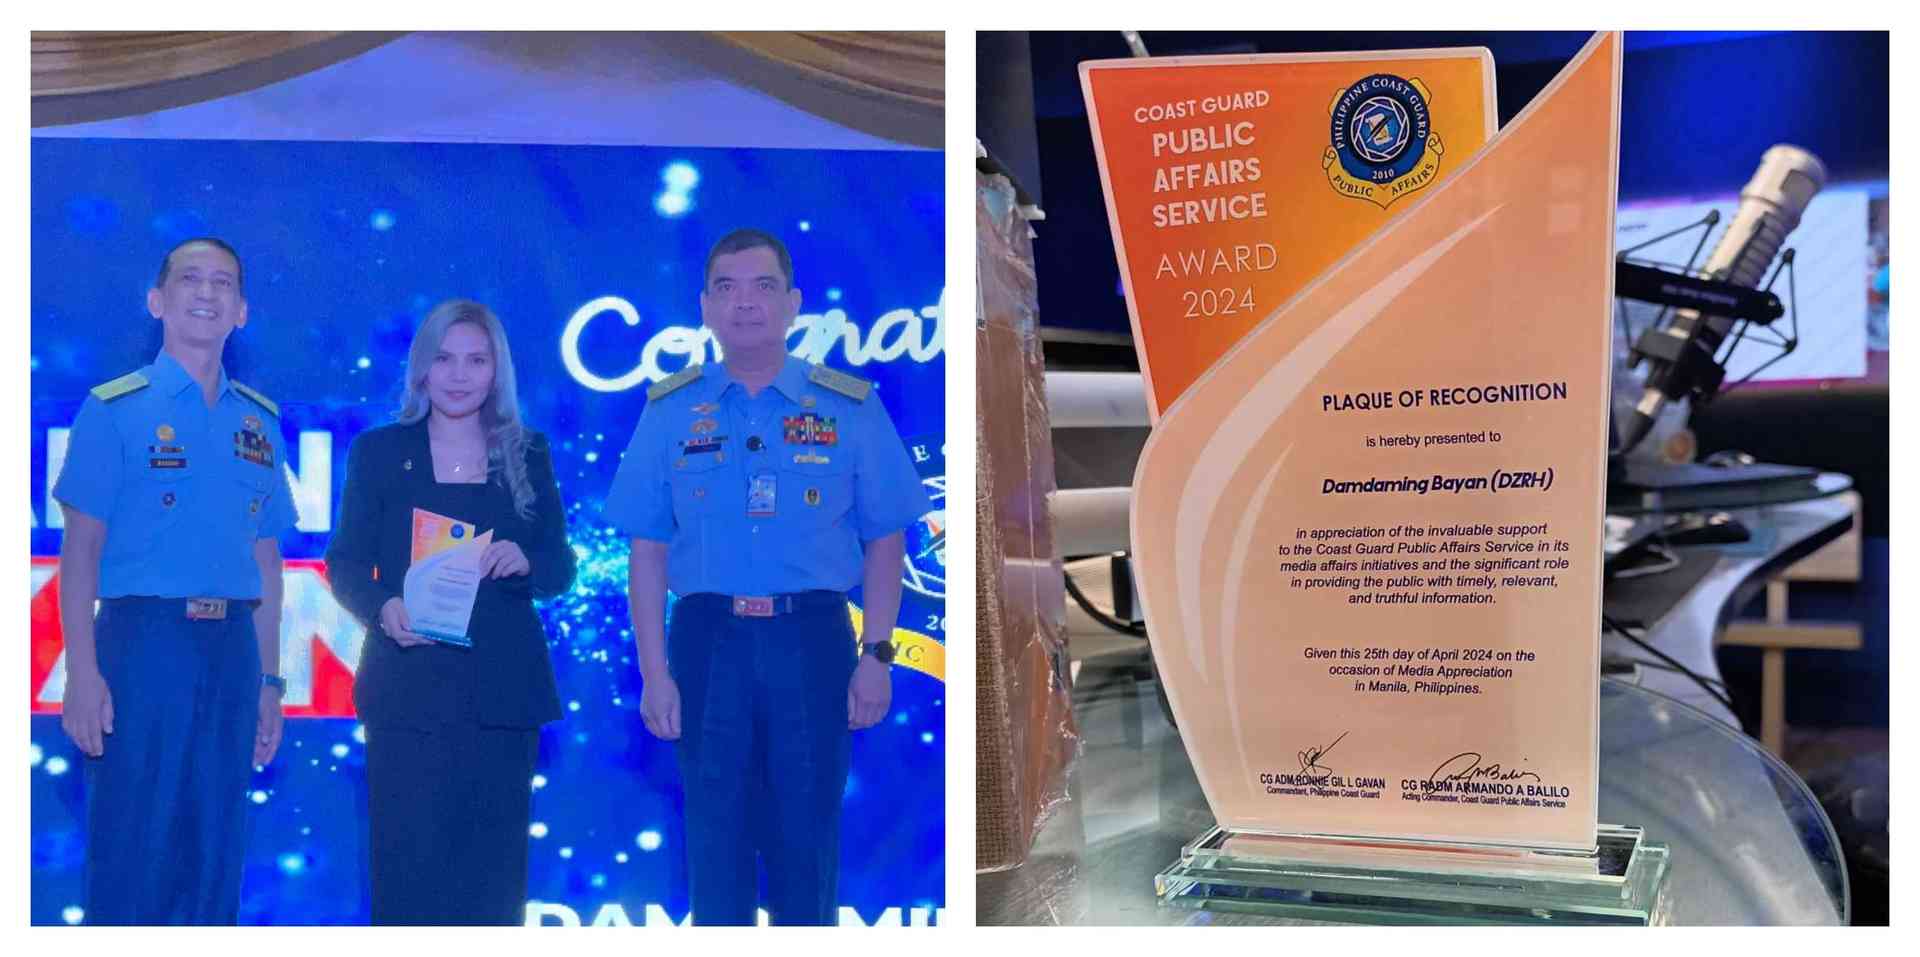 DZRH's Damdaming Bayan receives recognition for its public service affairs